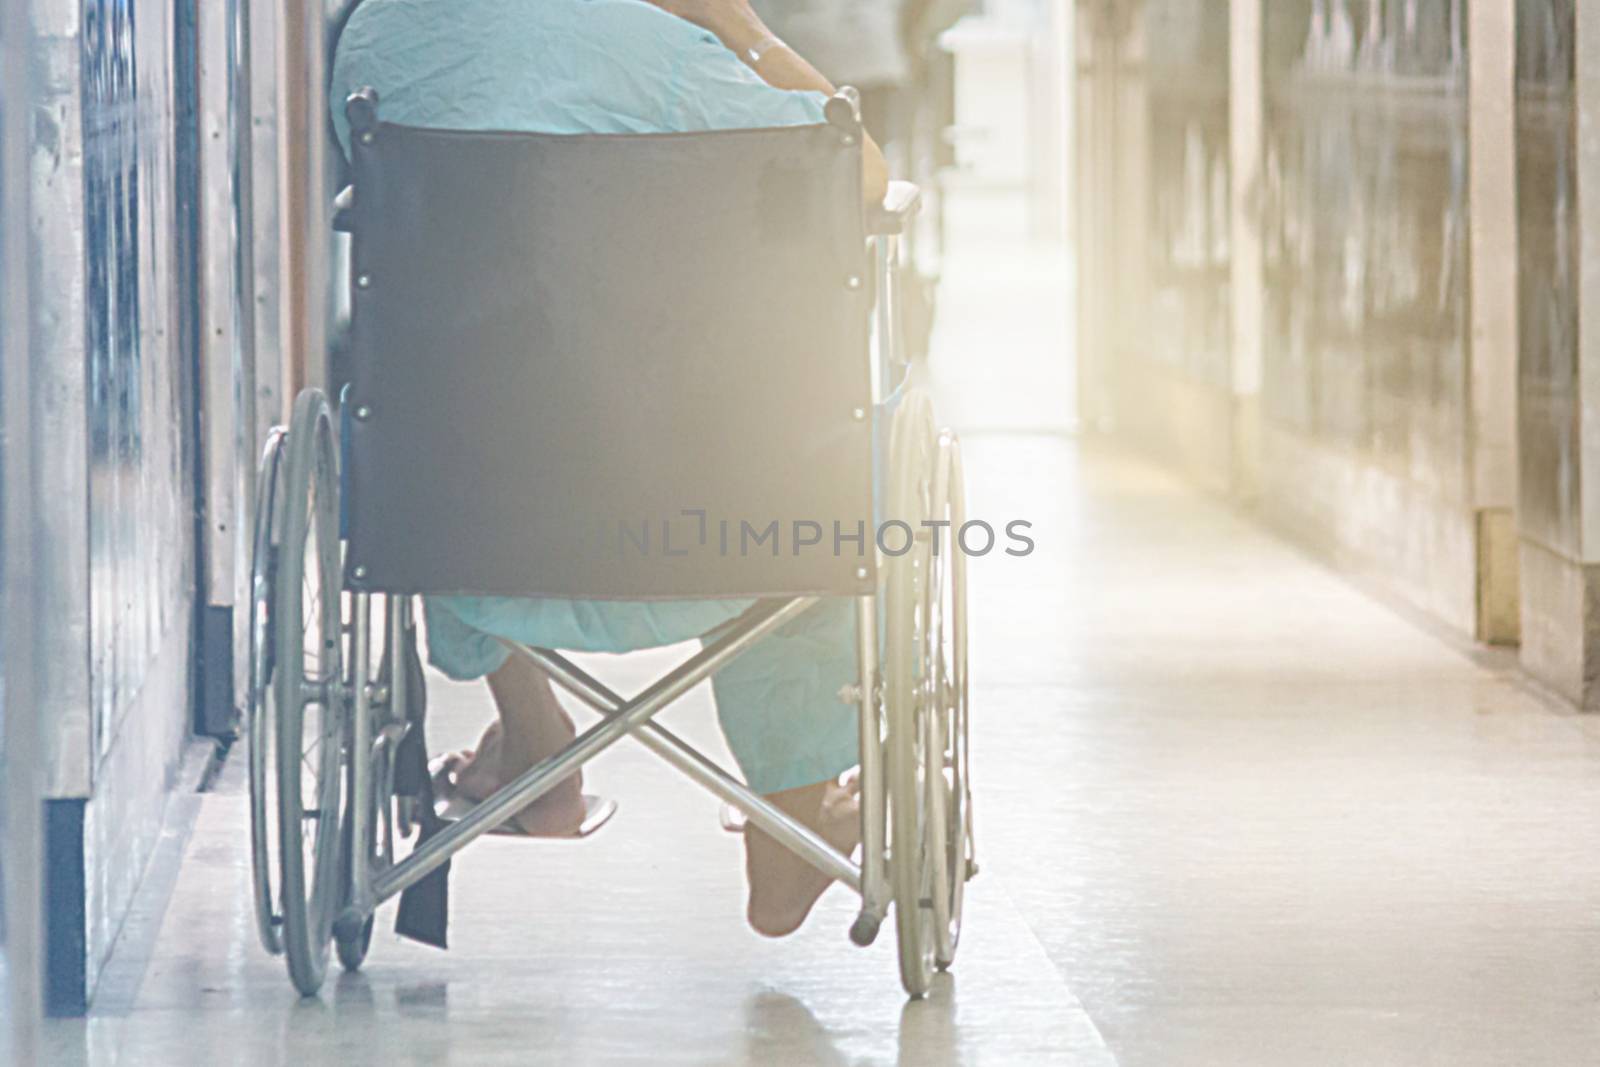 Abstract Of Man On Wheelchair In Front Of The Outpatient Department Of Hospital With Softlight.